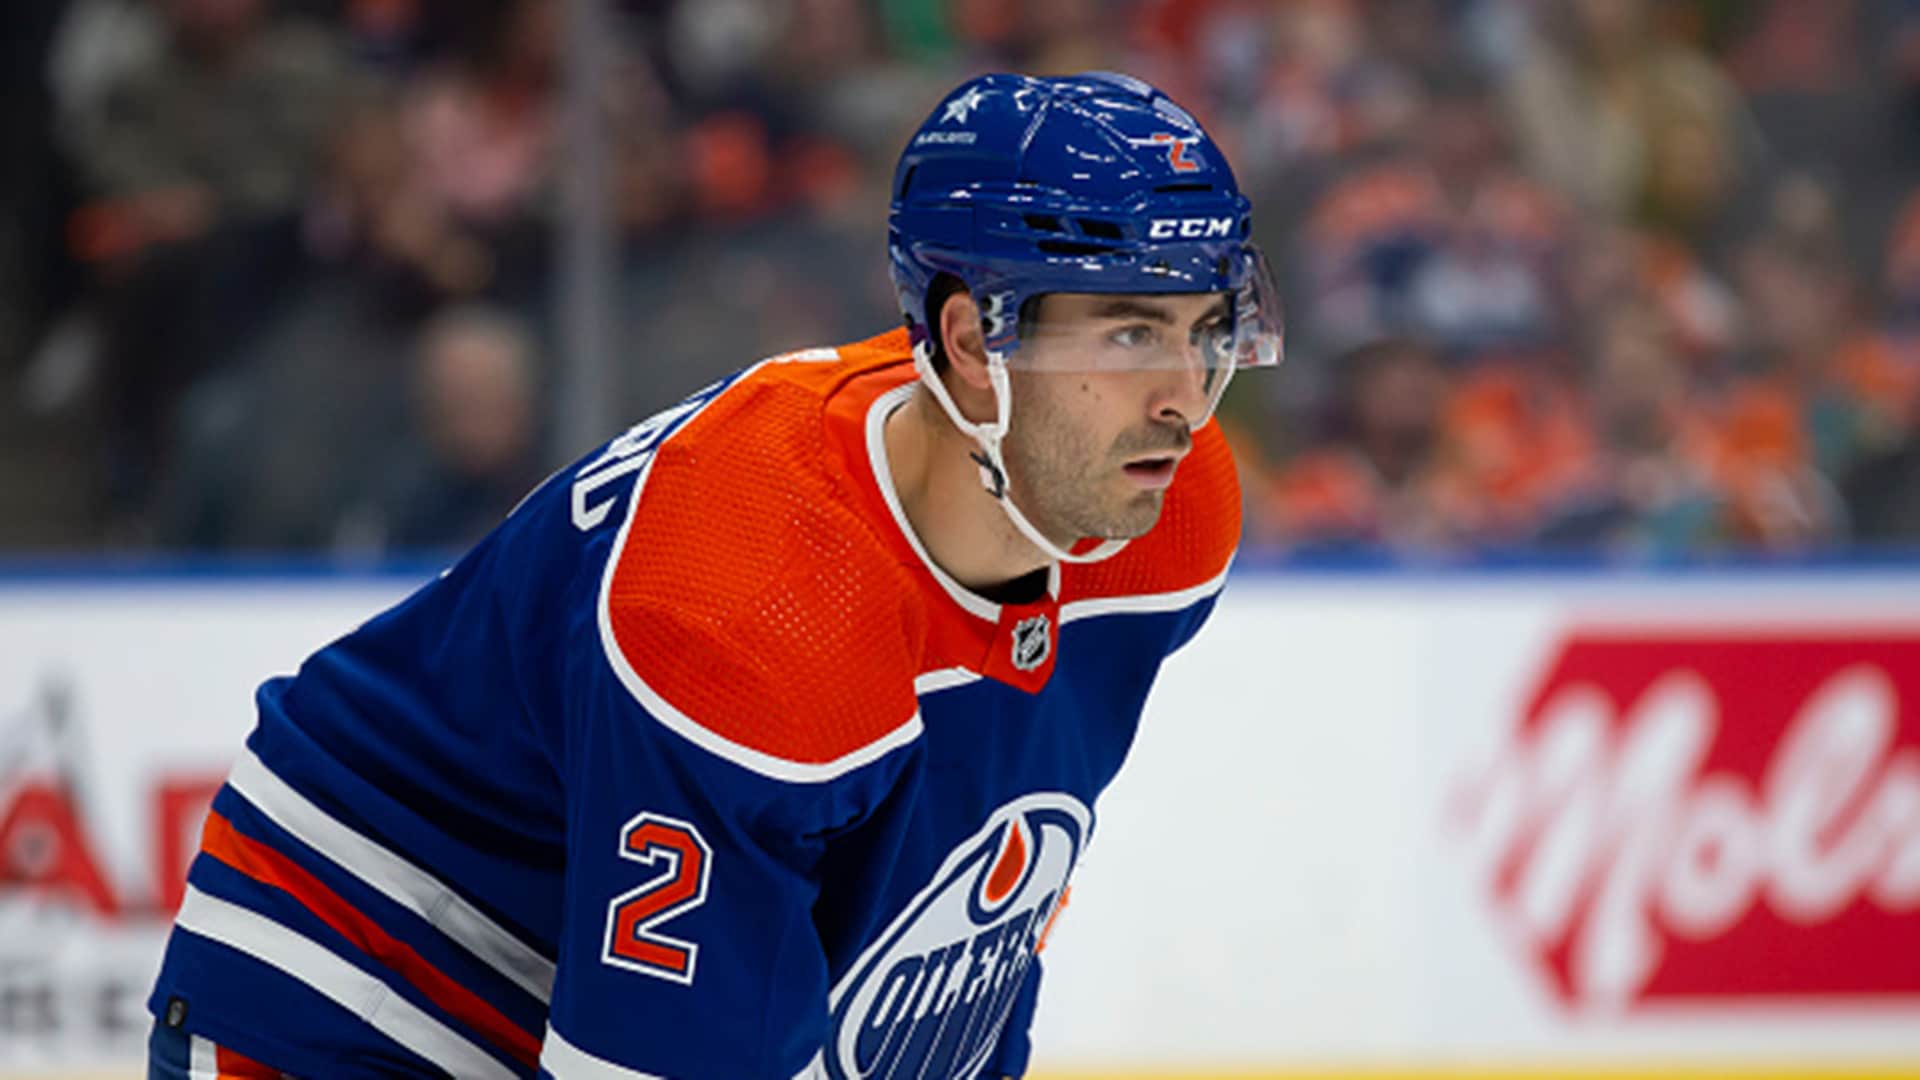 NHL playoffs: Oilers spark debate with 'targeted' hits on Golden